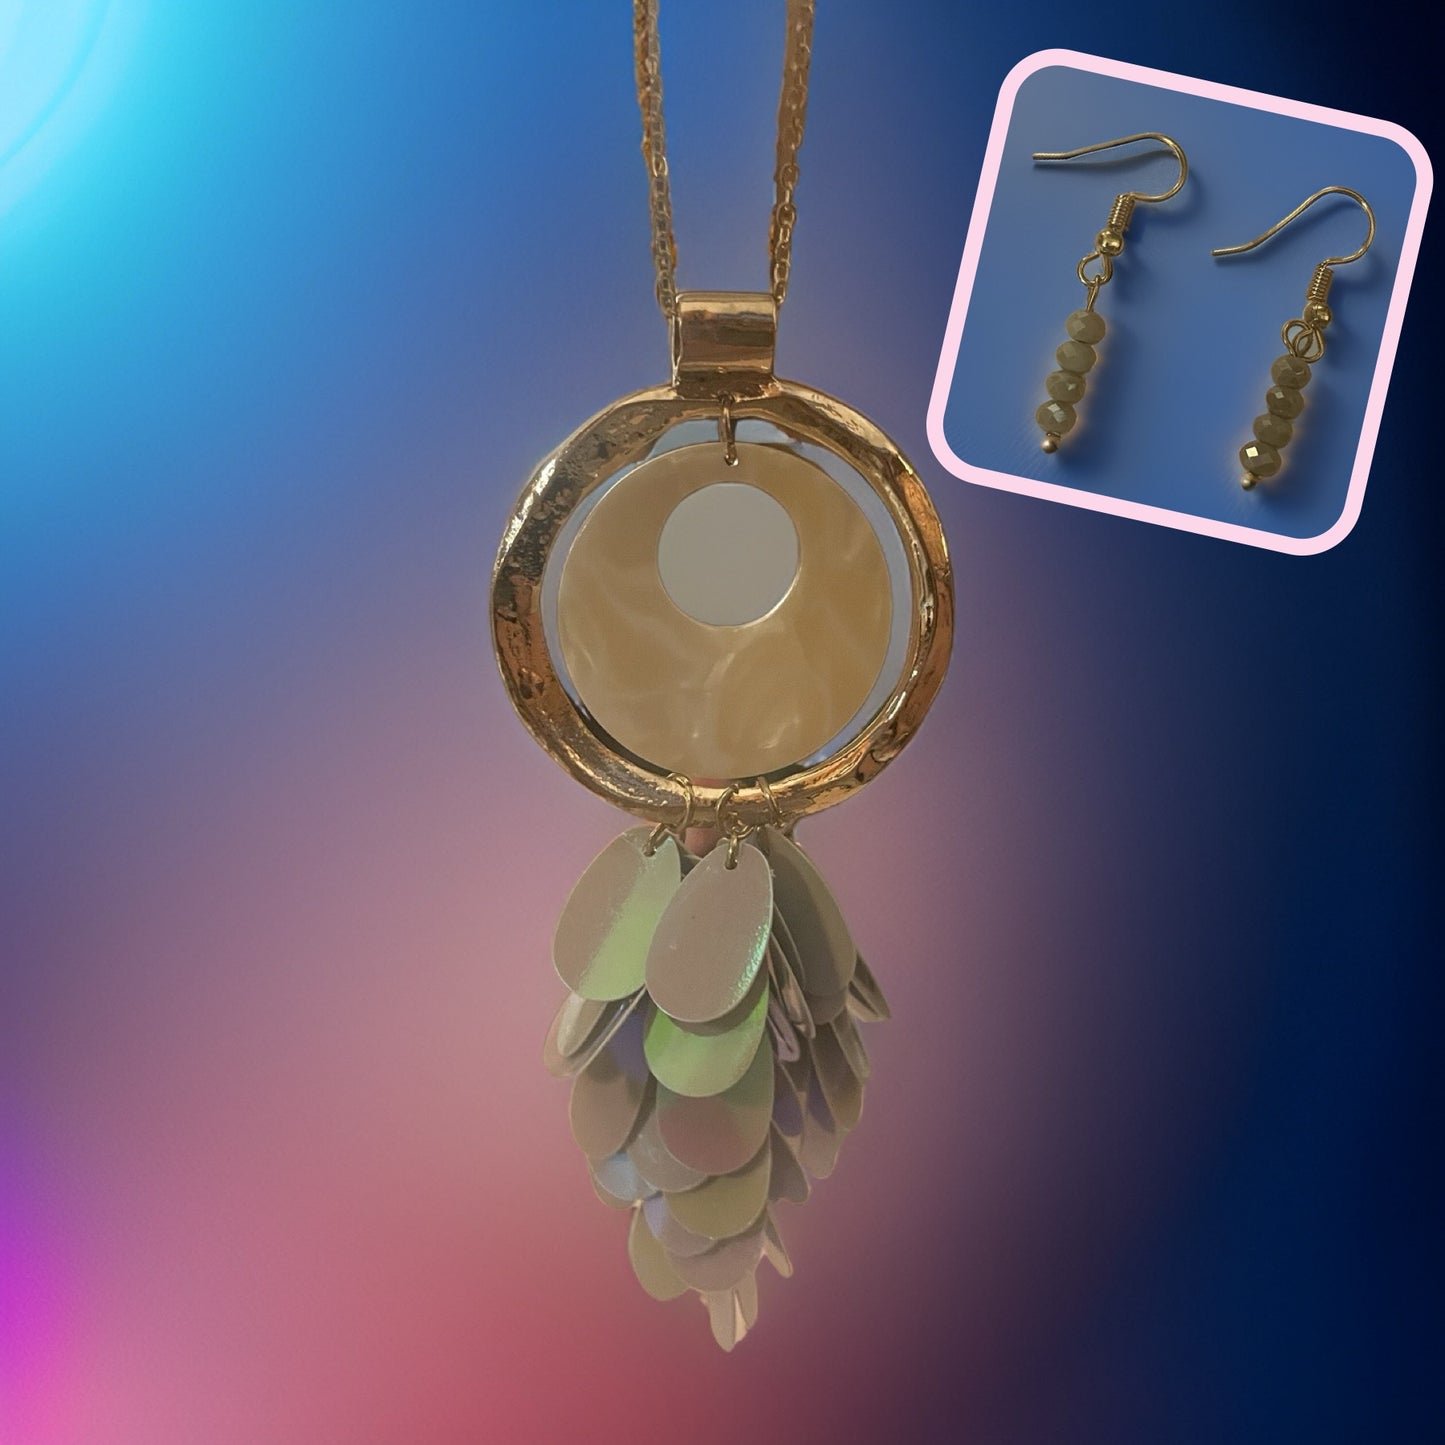 Hammered Gold Ring Pendant with Resin & Sequin Tassel Necklace & Earring Set - Available in 4 colors